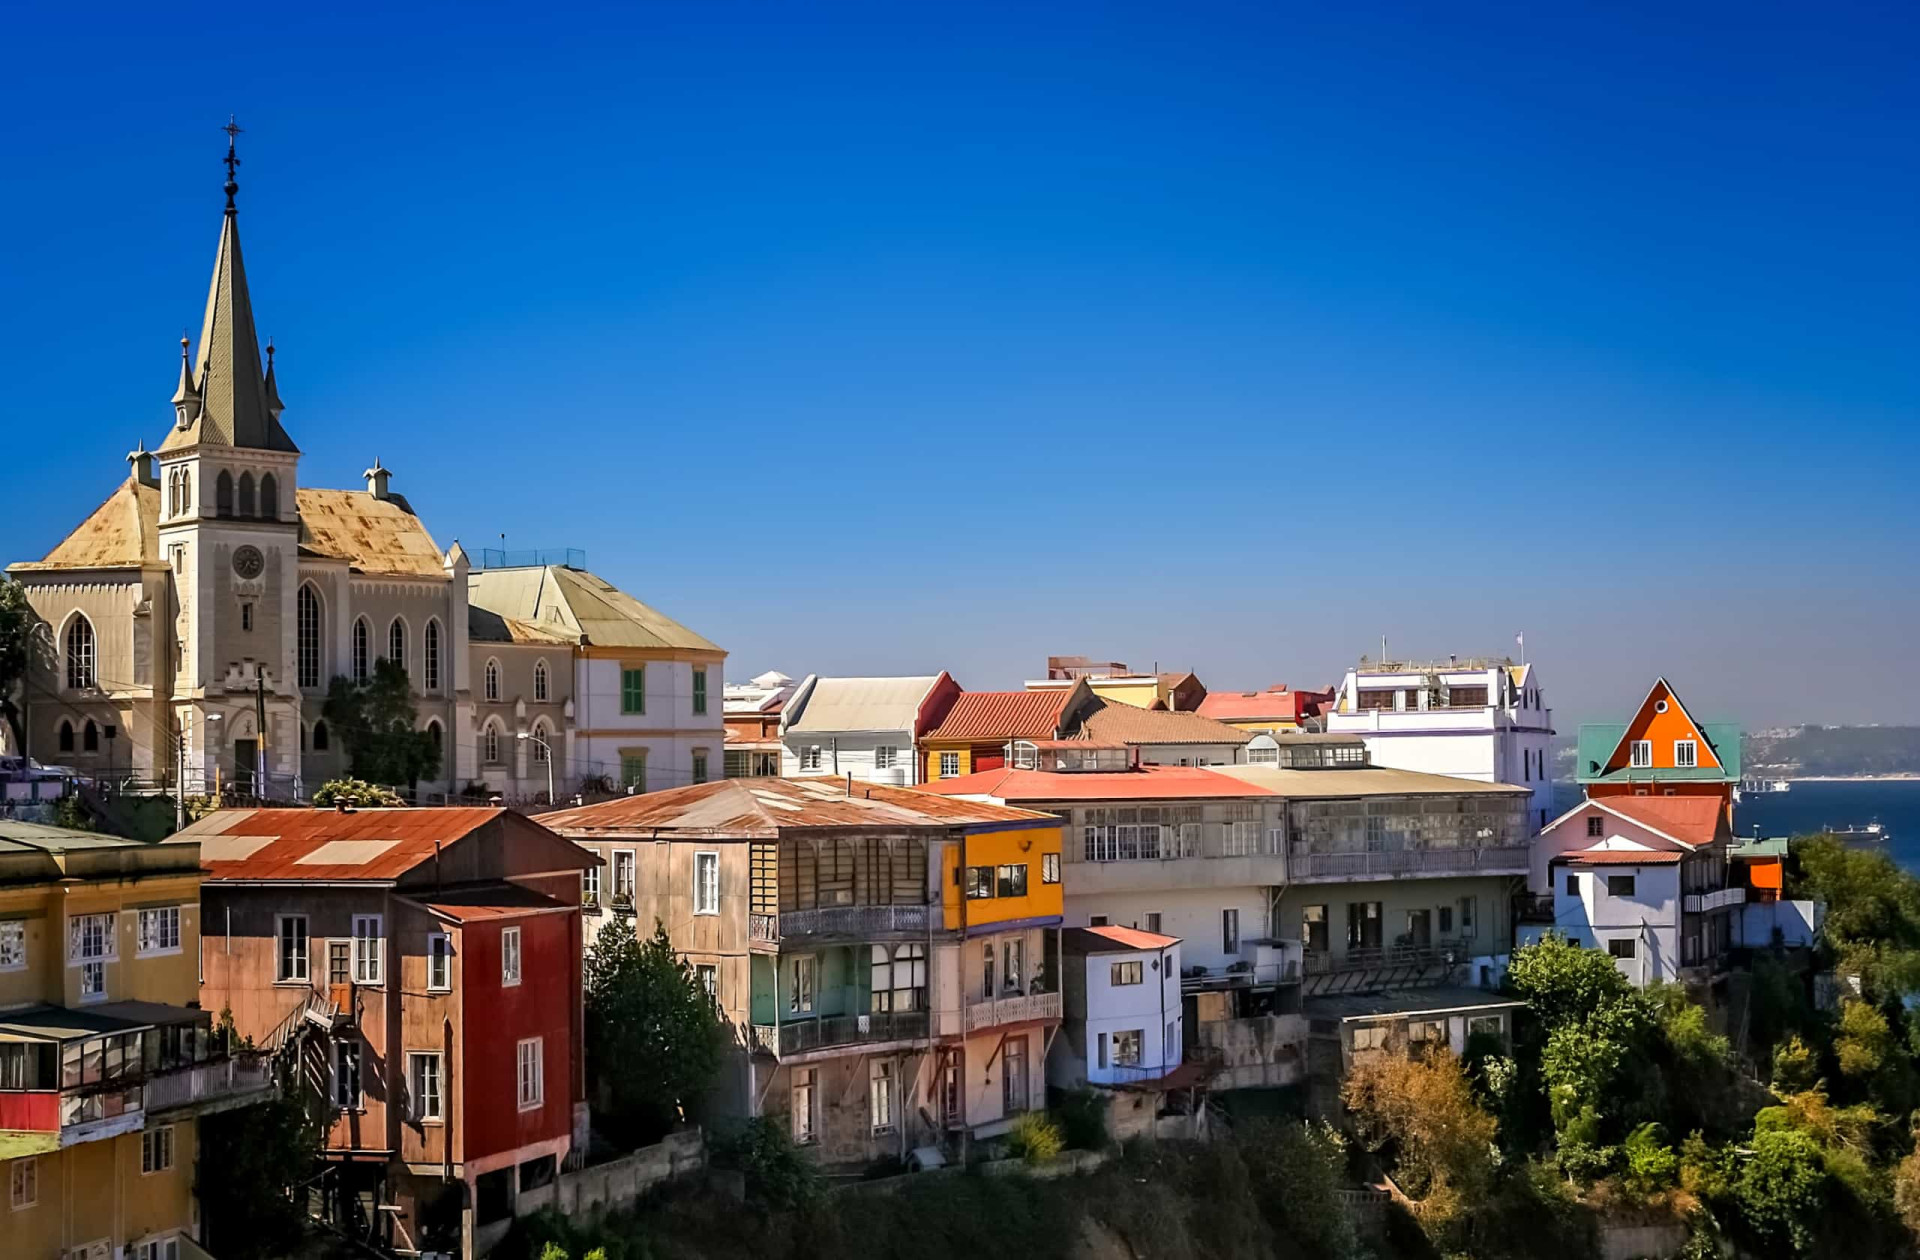 Location: Valparaíso<br>Criteria: Cultural<br>Year established: 2003<br>Description: A major stopover in the 19th century for ships sailing between the Atlantic and Pacific oceans via the Straits of Magellan, Valparaíso prospered as a magnet for European immigrants.